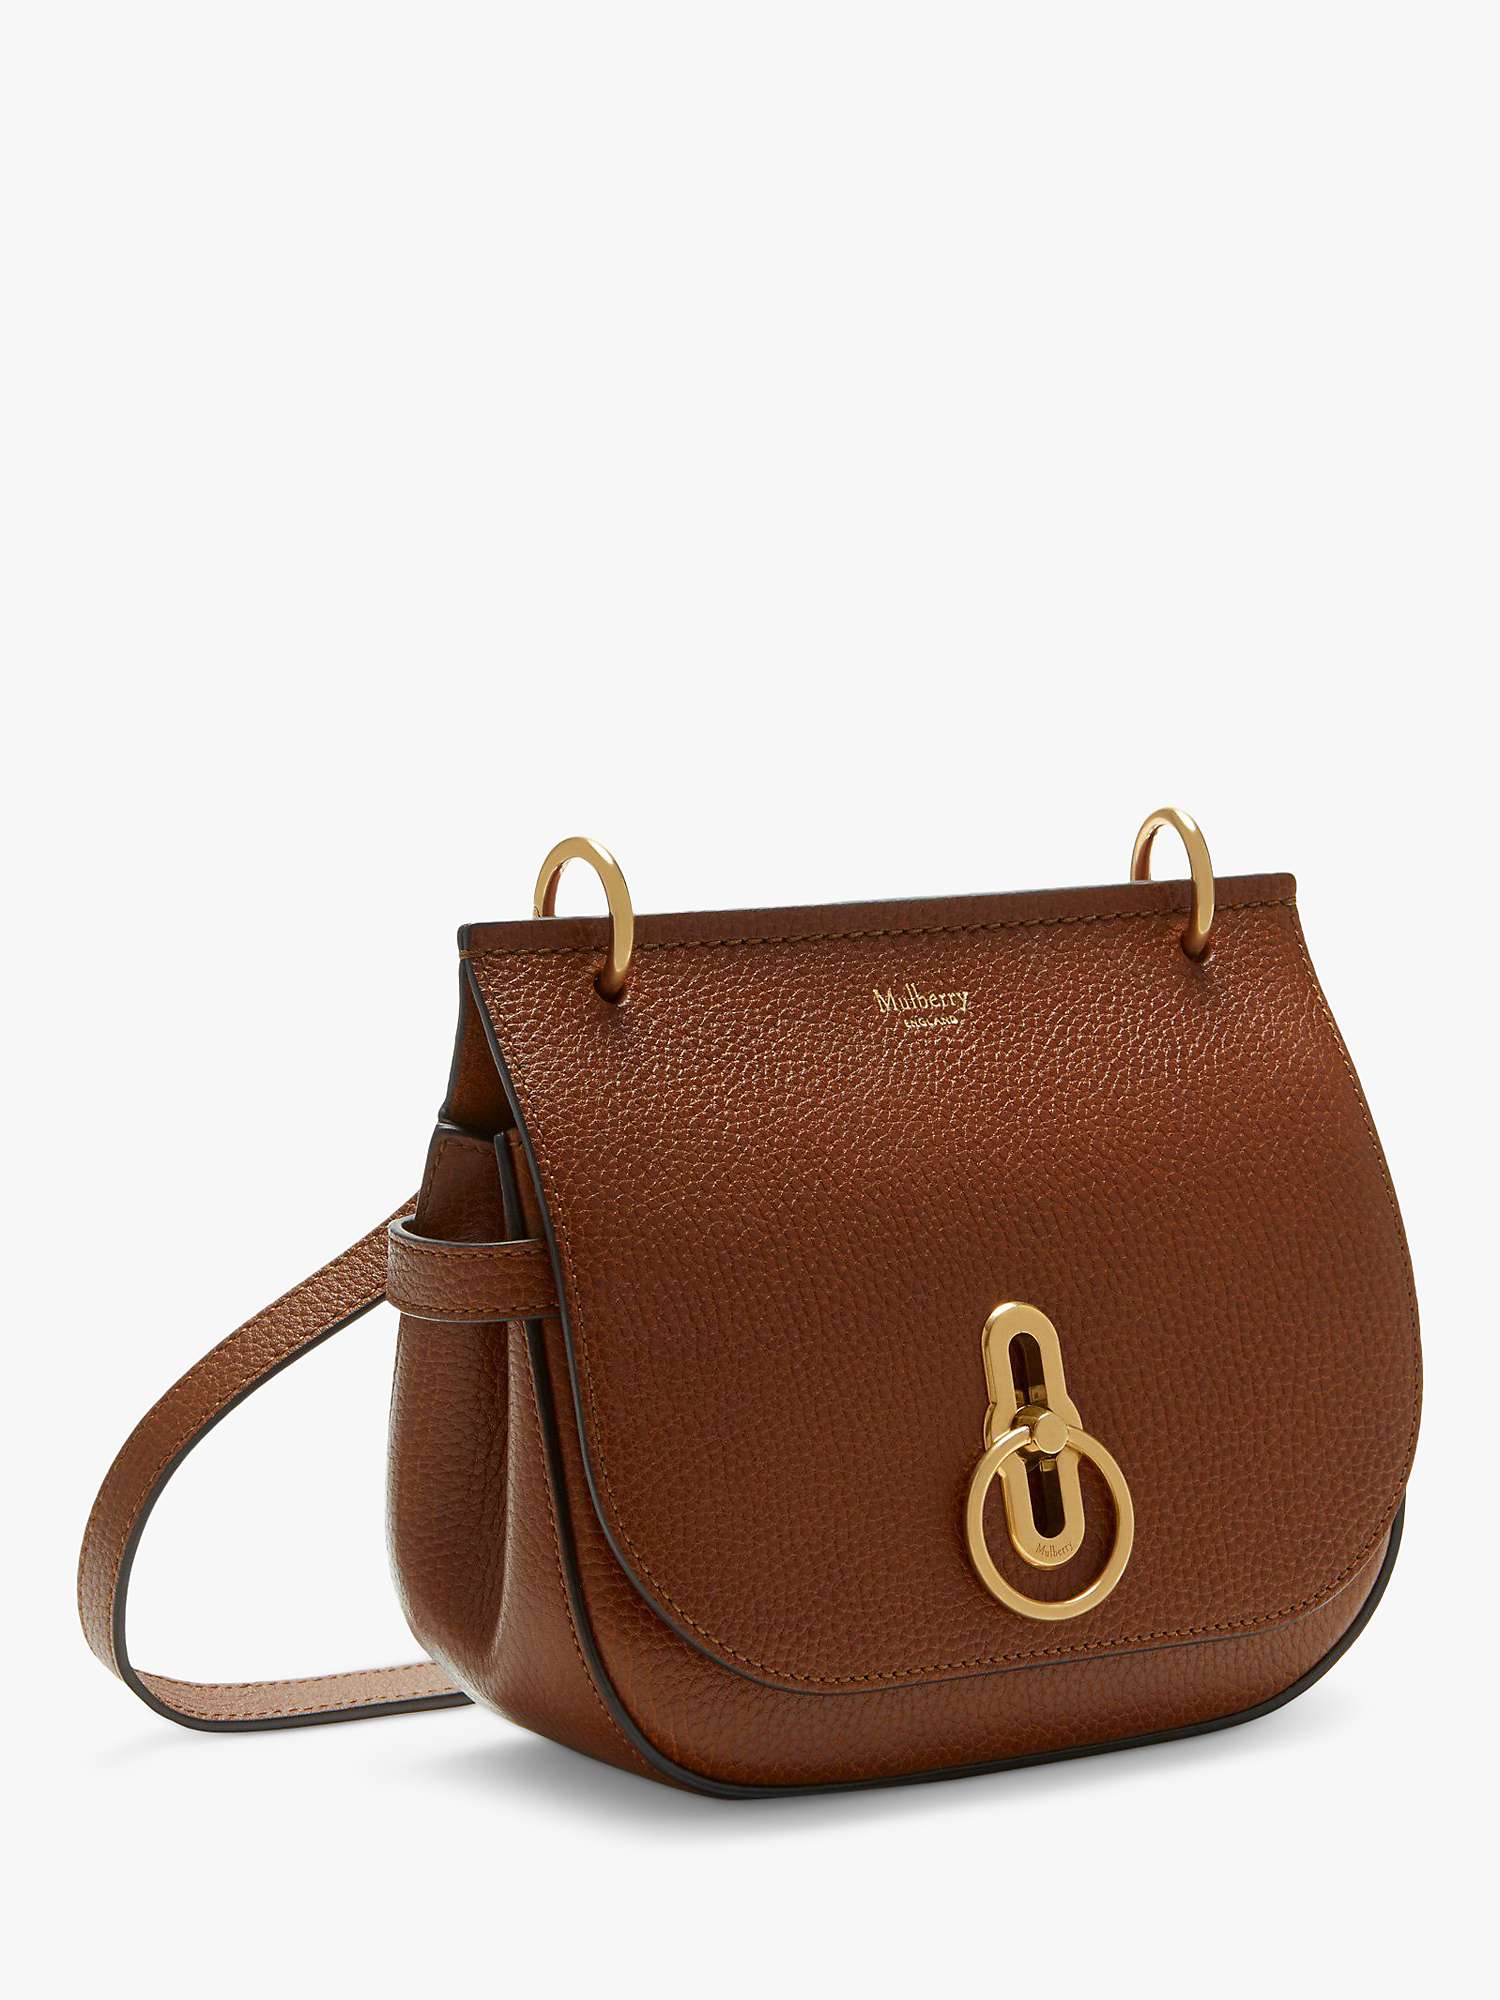 Buy Mulberry Small Amberley Small Classic Grain Leather Satchel Online at johnlewis.com